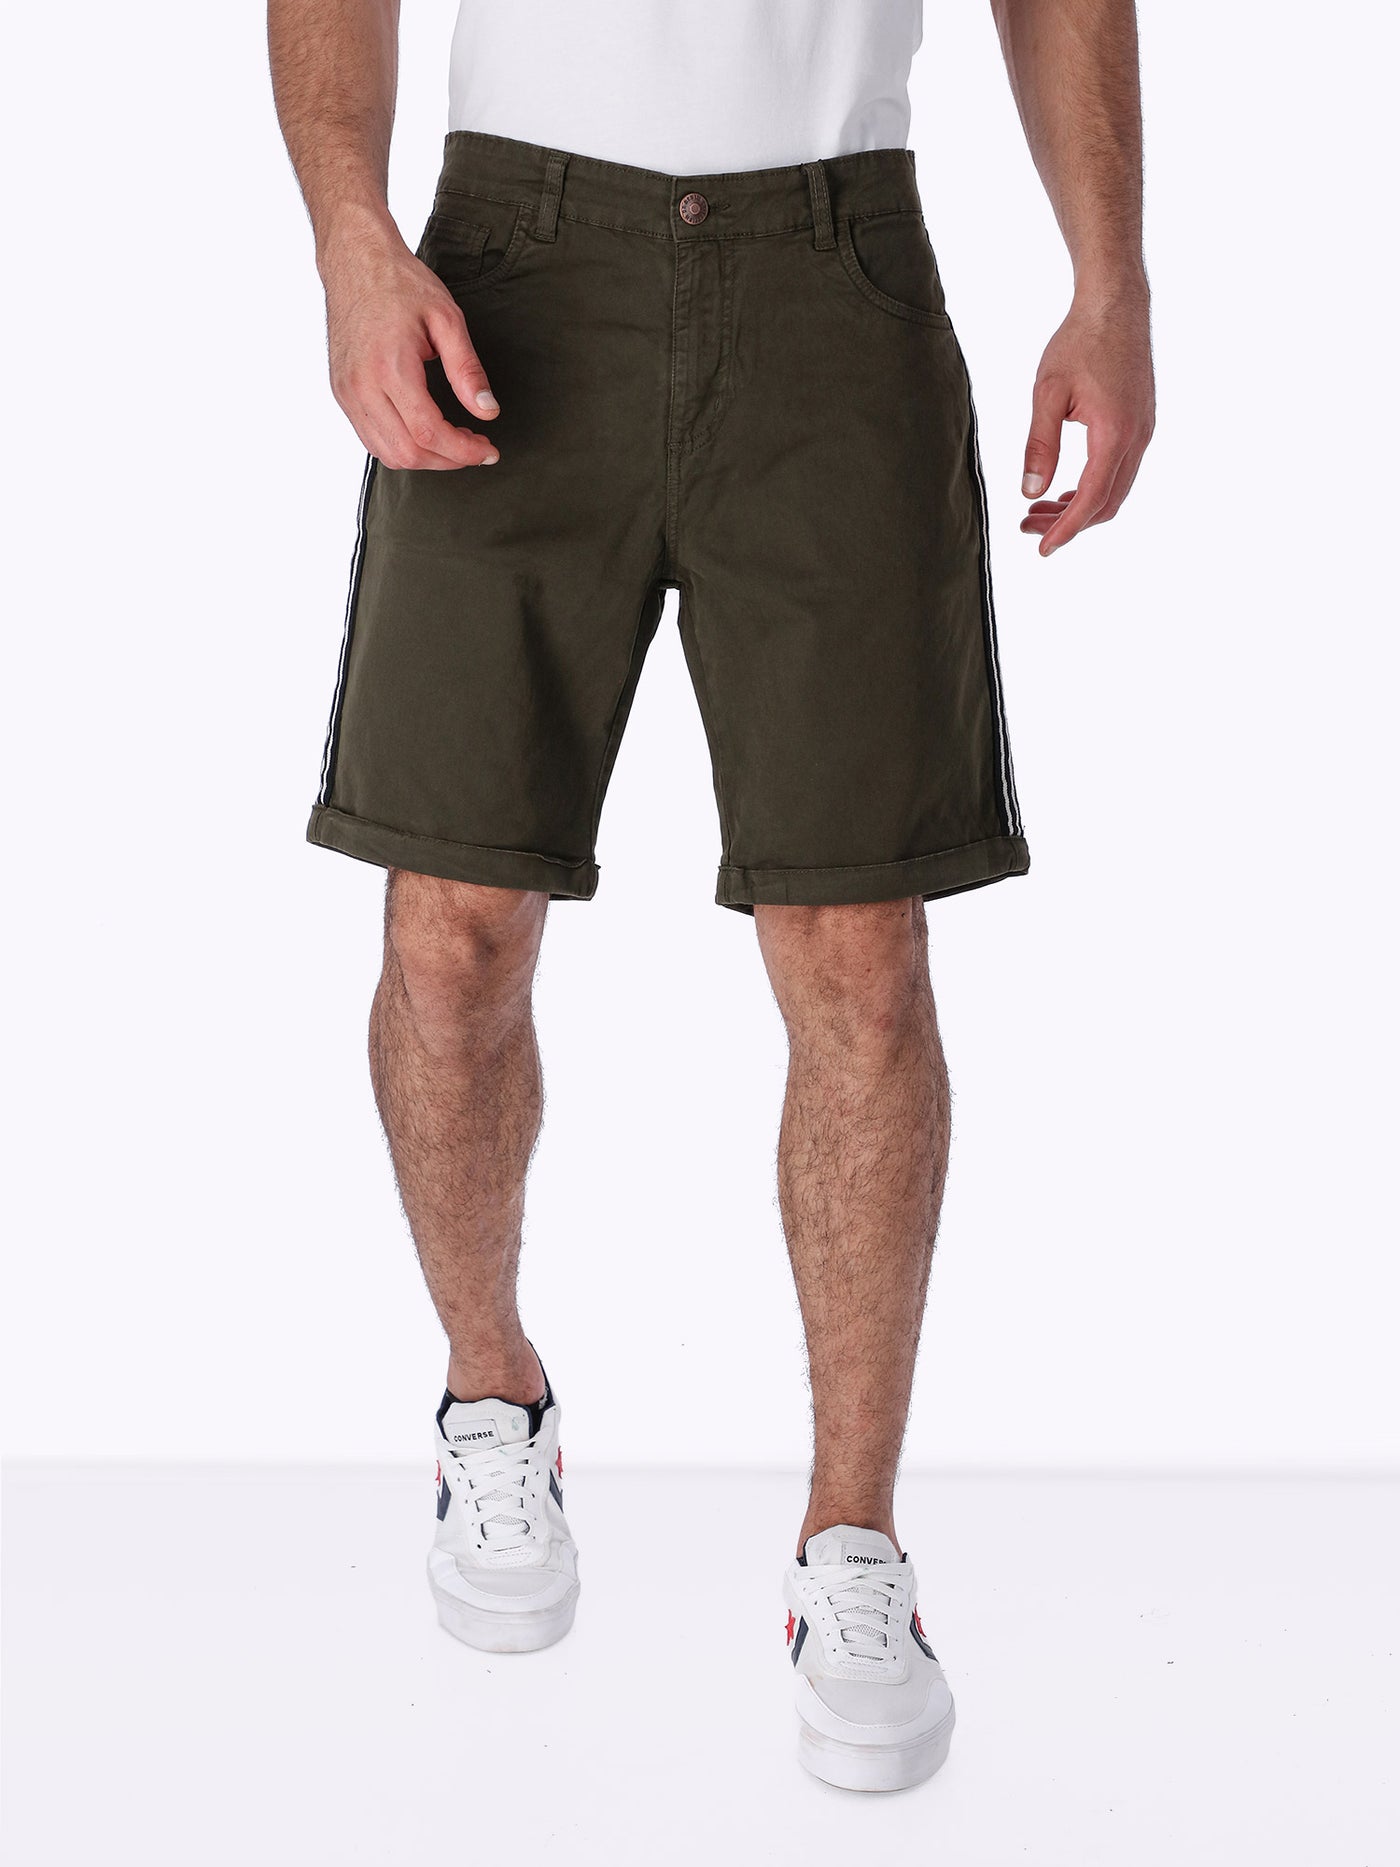 OR Men's Rolled Up Casual Shorts